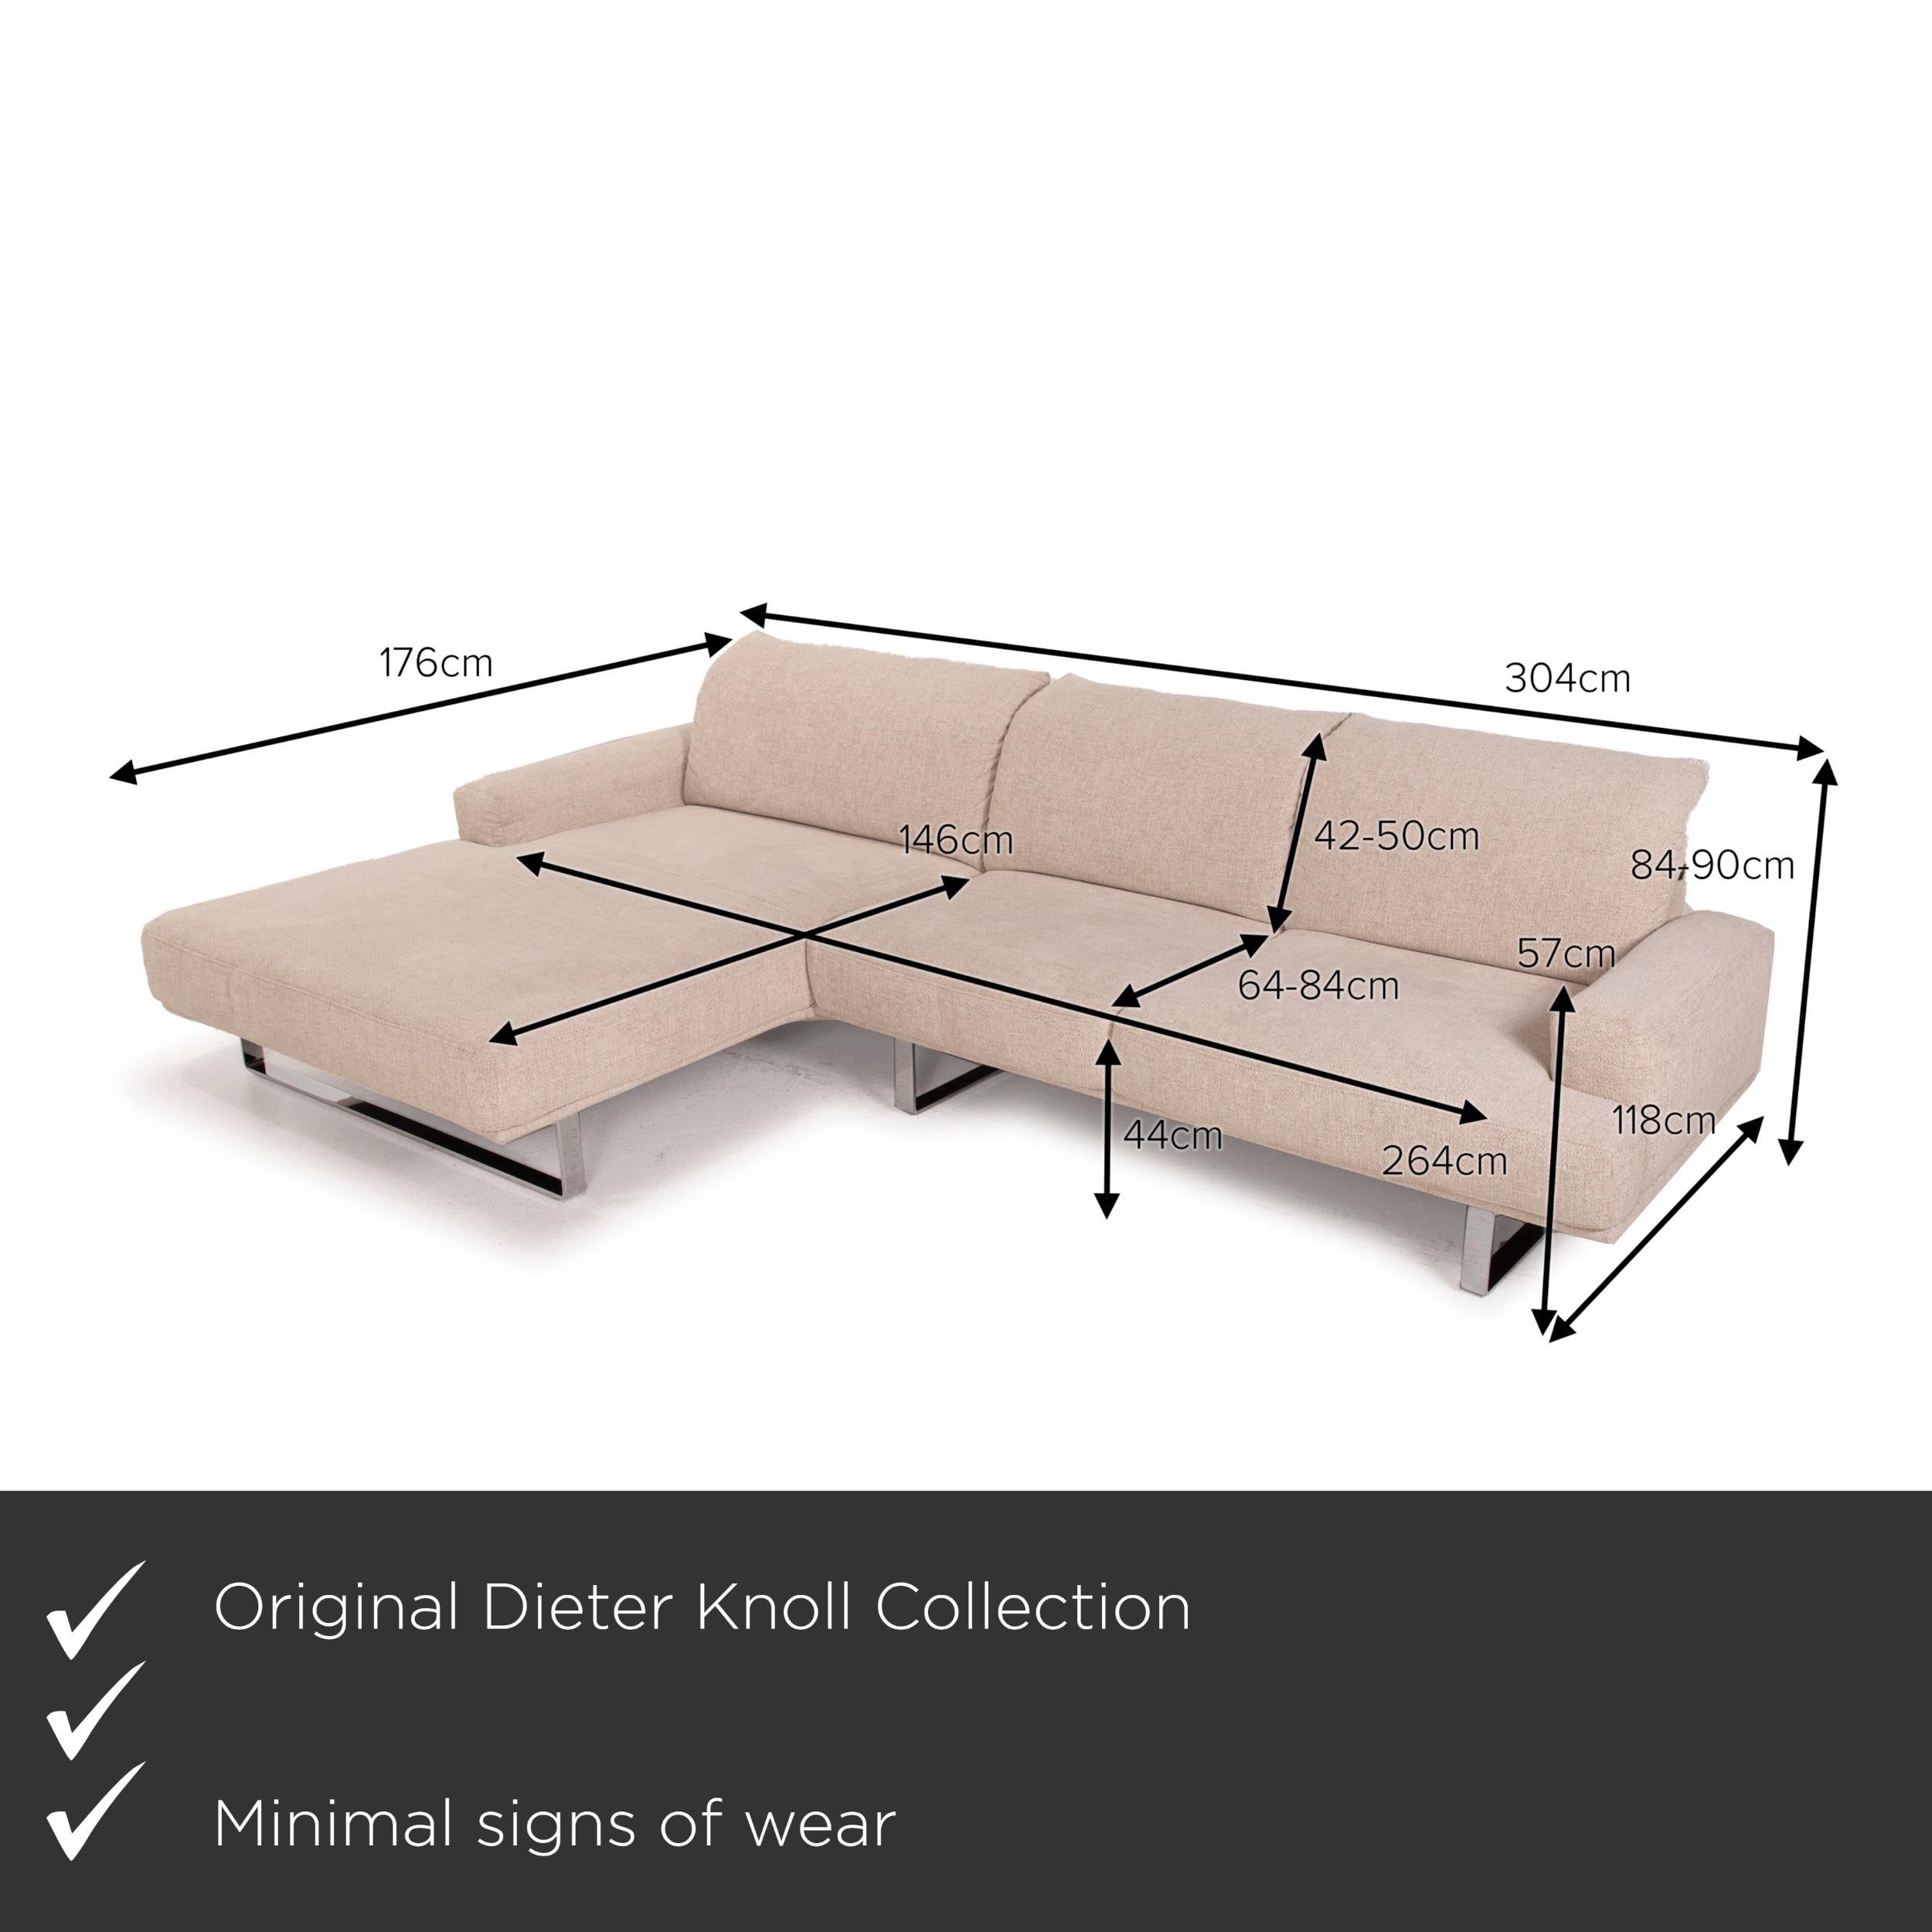 We present to you a Dieter Knoll Collection Lesina fabric sofa cream corner sofa electrical function.


 Product measurements in centimeters:
 

Depth: 97
Width: 176
Height: 84
Seat height: 44
Rest height: 57
Seat depth: 146
Seat width: